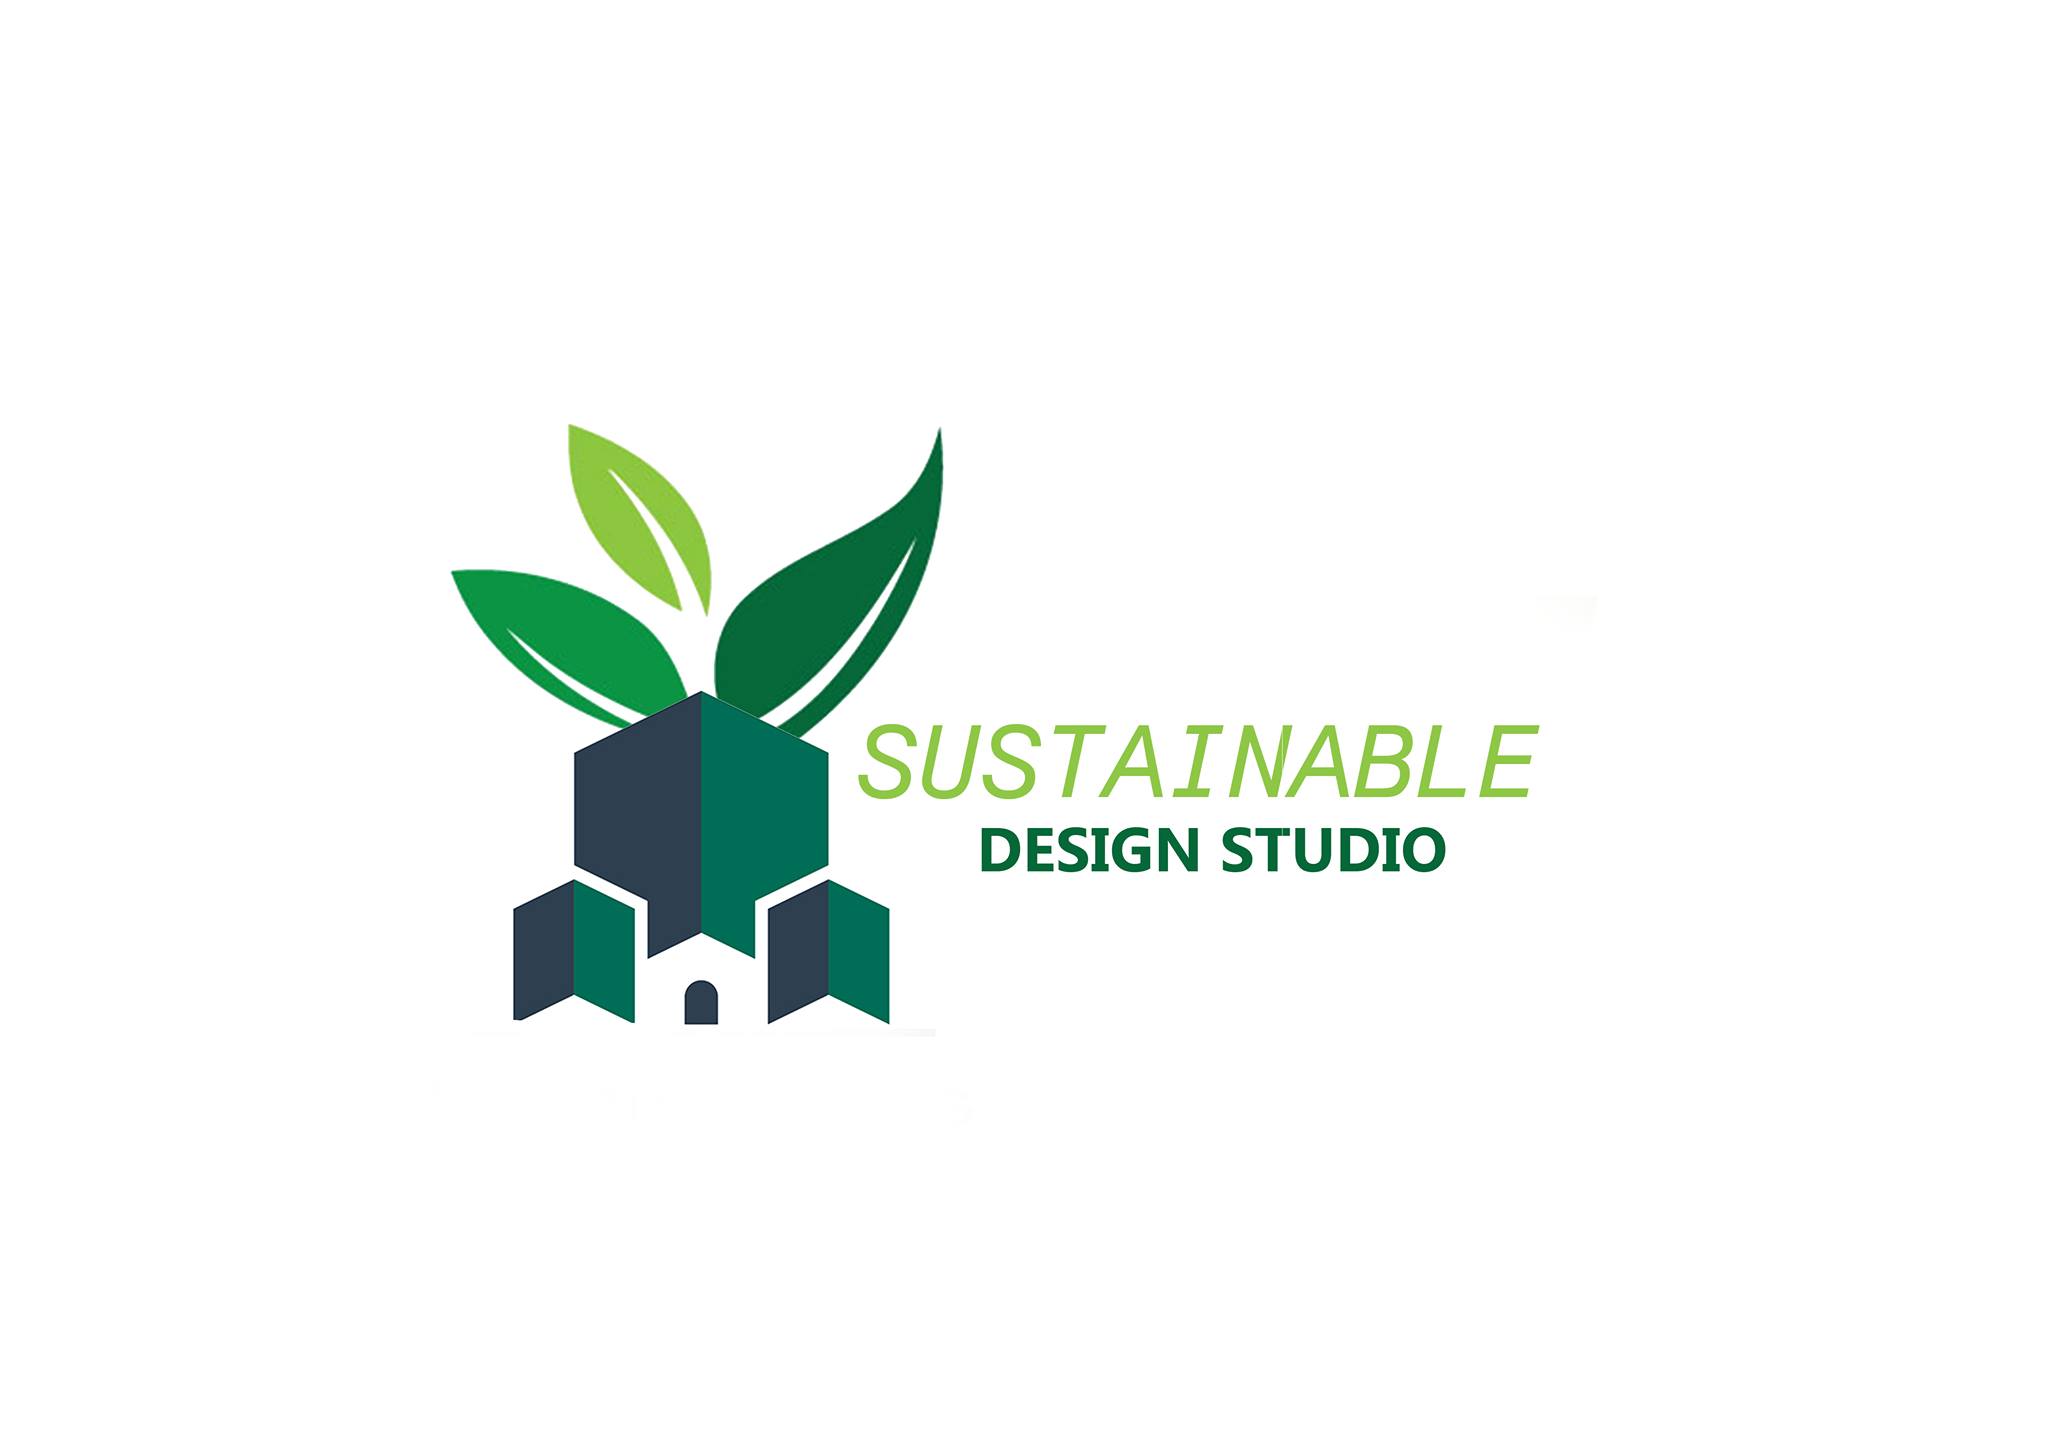 Sustainable design studio|Accounting Services|Professional Services